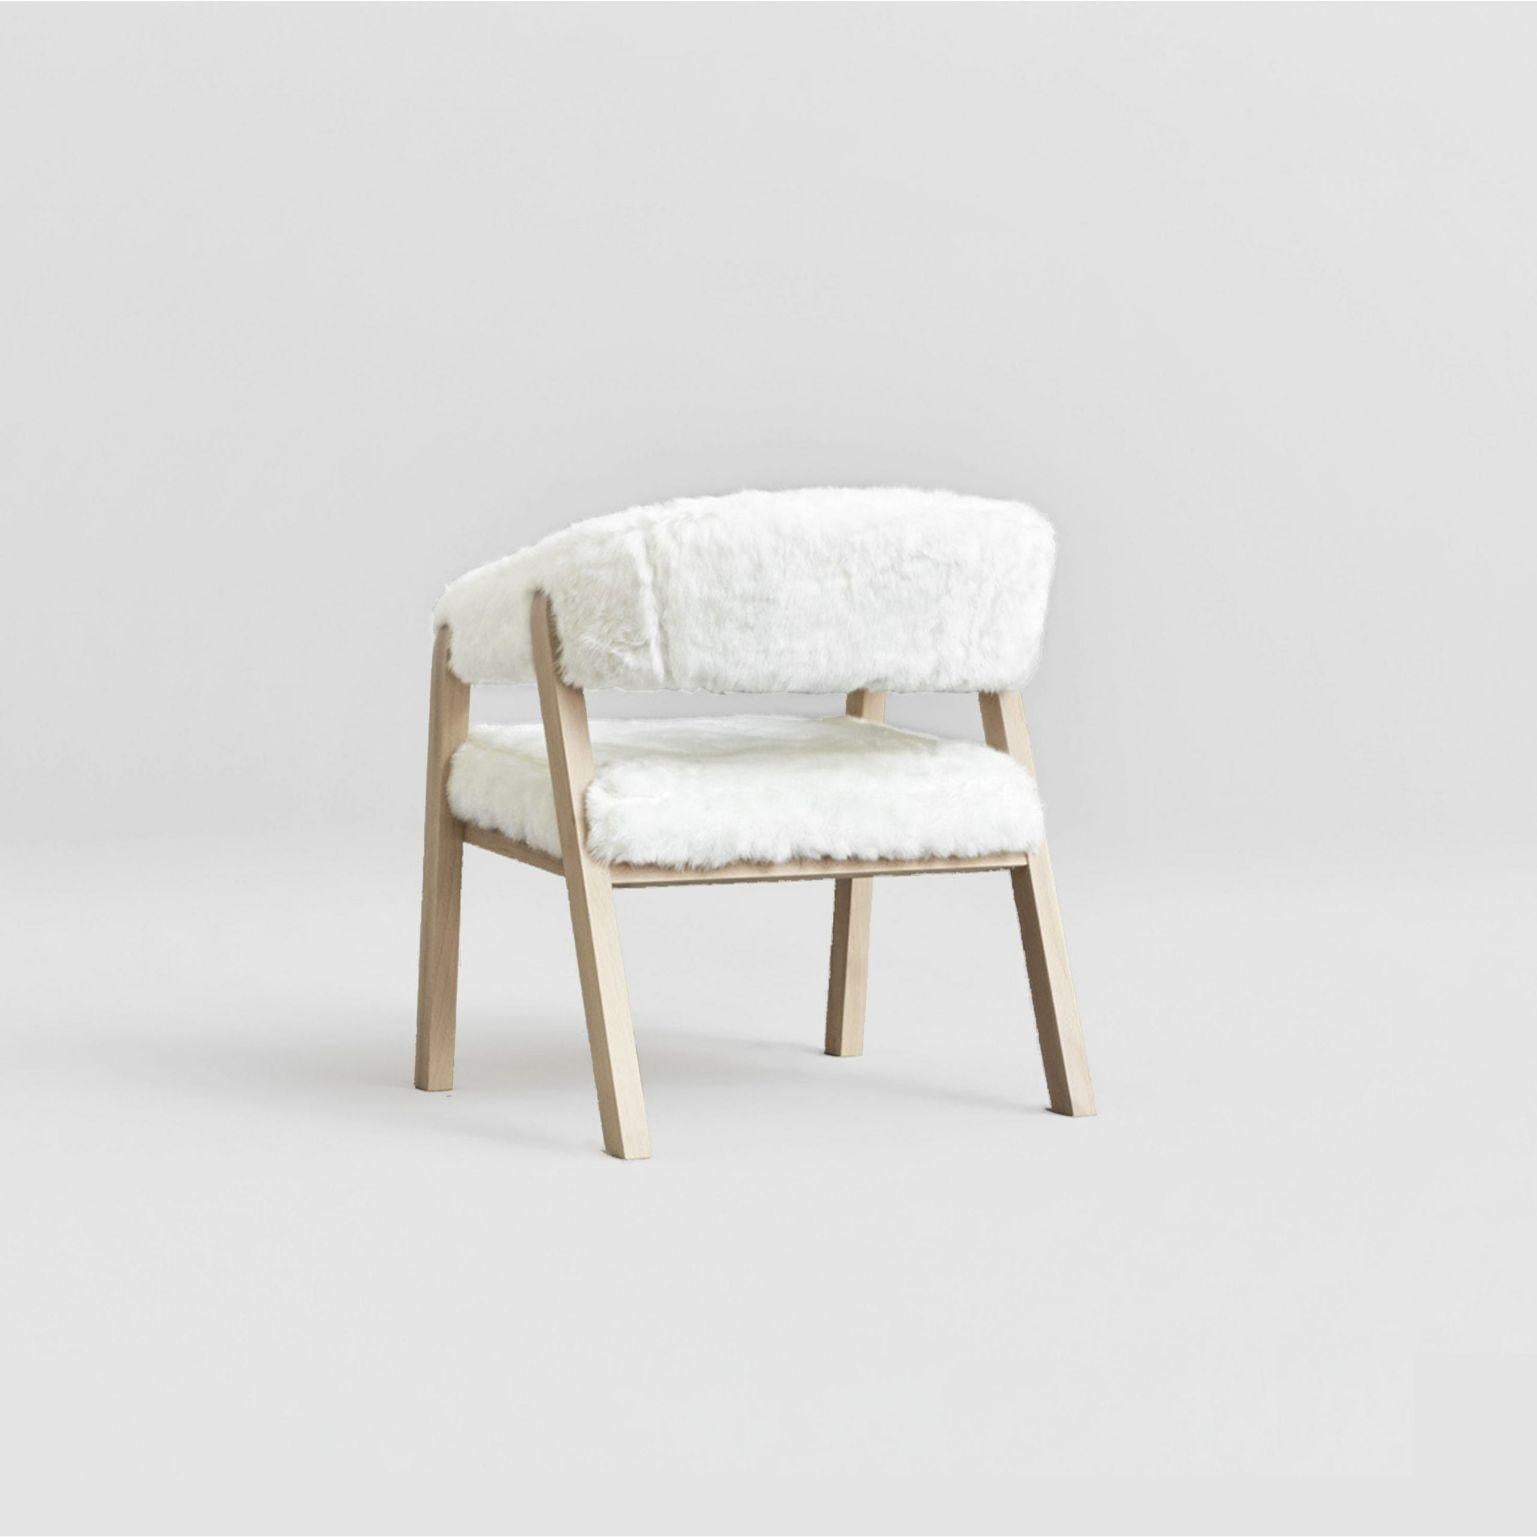 Oslo armchair - arctic fox throw by Pepe Albargues
Dimensions: W65, D60, H73, Seat 44
Materials: Beech wood structure.
Foam CMHR (high resilience and flame retardant) for all our cushion filling systems

Also available: Variations of materials